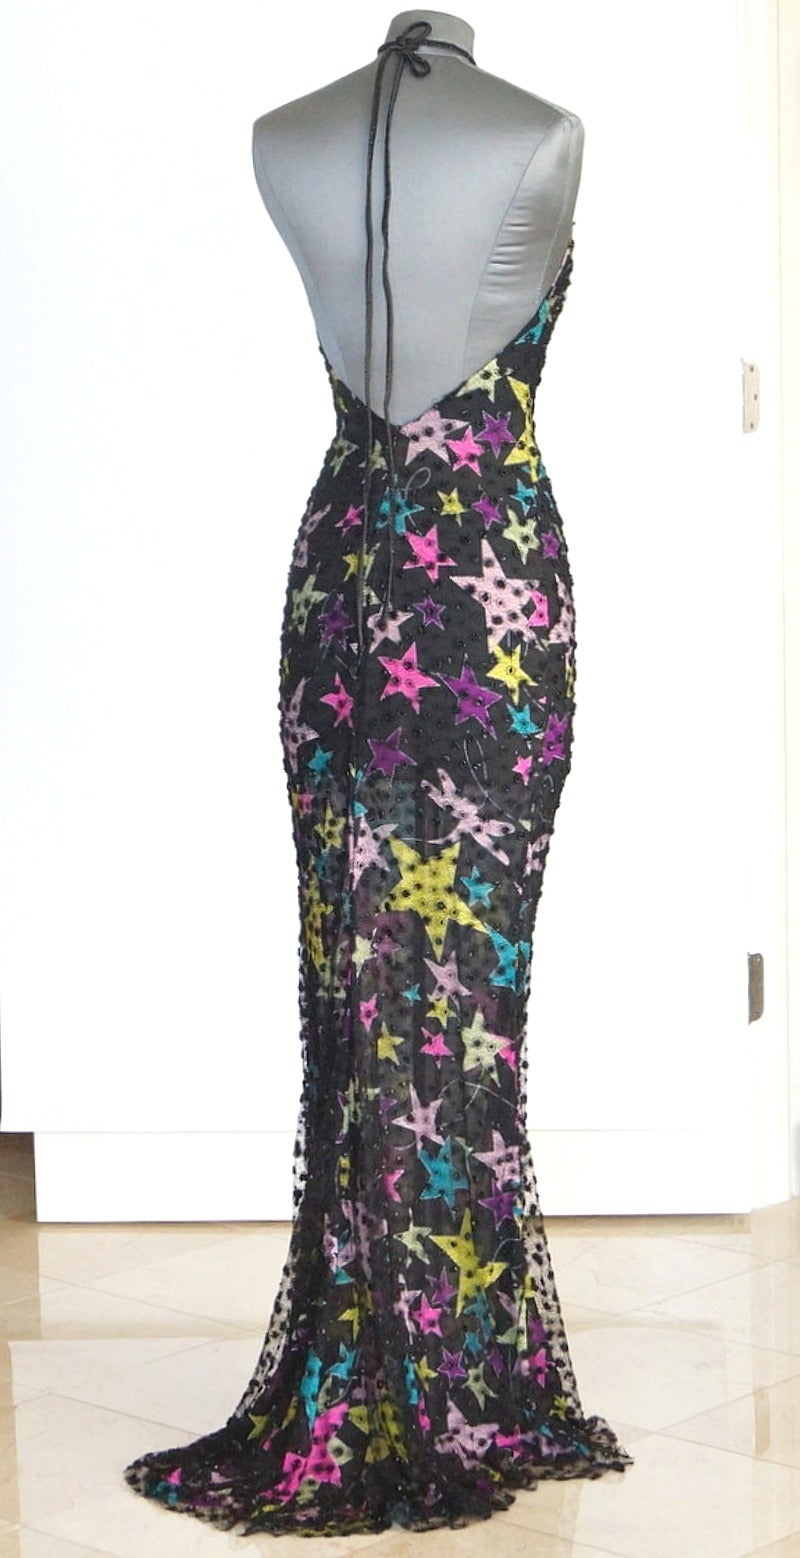 GIANNI VERSACE COUTURE stunning long dress.  Fabulously flattering and vibrant colour.
Halter style with a low back.
The upper is a delicate black lace with small black beads throughout.
The ties around the neck are encrusted with black